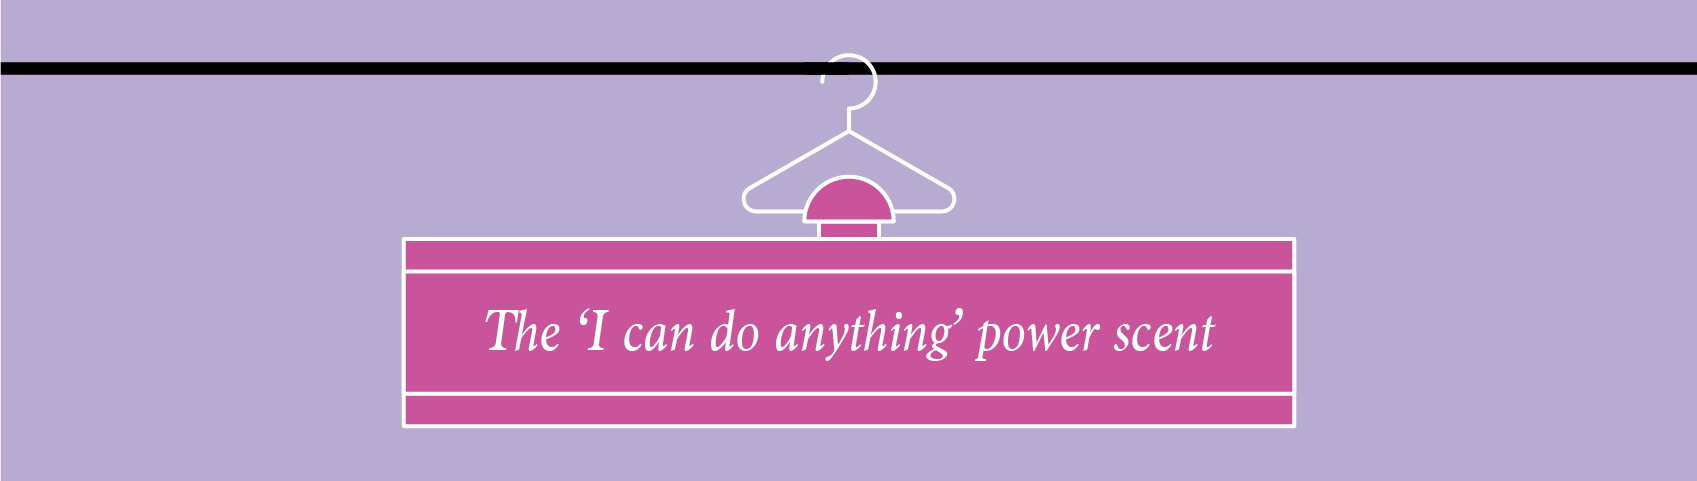 illustration of perfume bottle on a coat hanger the i can do anything power scent